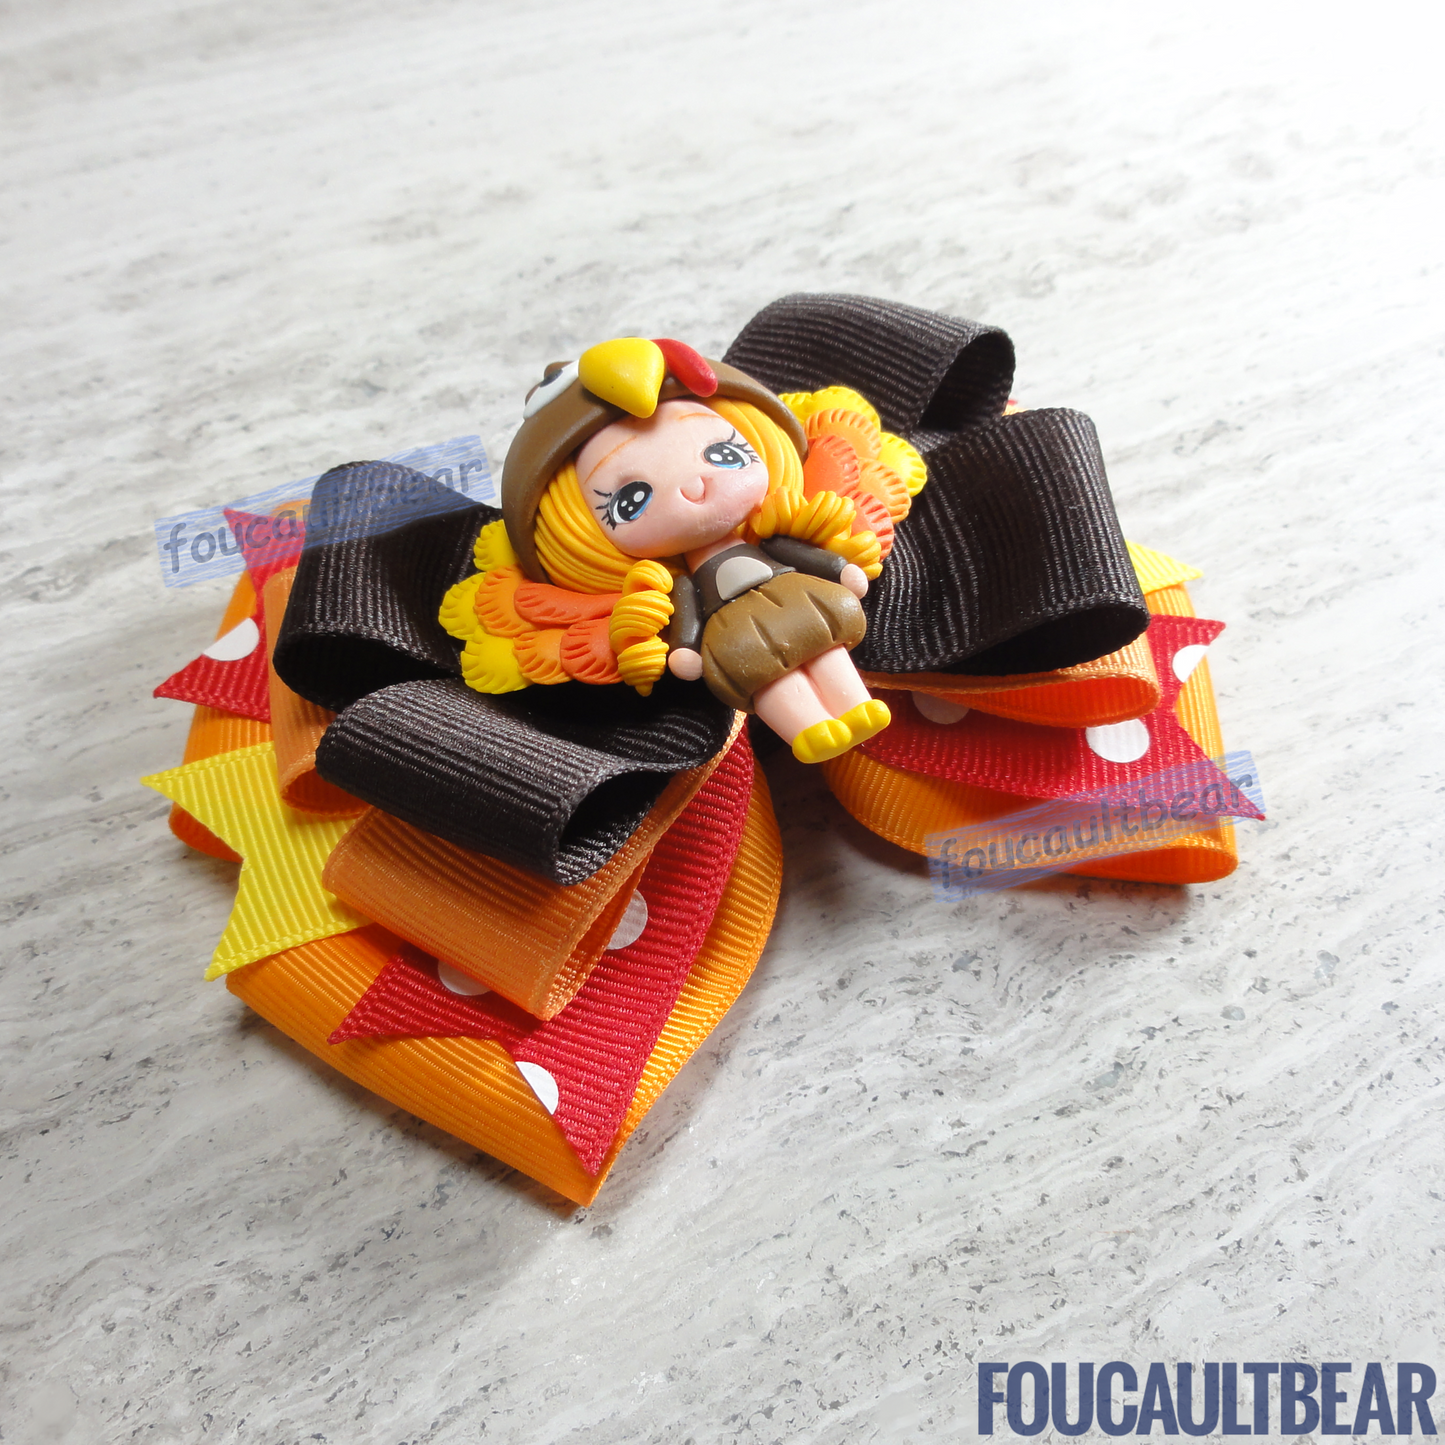 Foucaultbear's HANDMADE MULTI-LAYERED HAIR BOW CLIP with CLAY CENTERPIECE. Clay Girl in Turkey Outfit. Handmade Polymer Clay Centerpiece. Grosgrain Ribbon. French Barrette Hair Clip for Ponytail & Pigtails. Adorable Girl in Turkey Outfit Handmade Polymer Clay centerpiece adorns this hair bow. Perfect for toddlers, preschoolers, kindergartners, elementary or even middle-schoolers for the coming Halloween, Thanksgiving & Christmas holiday seasons, or year round when you just need a girl in a turkey costume! 